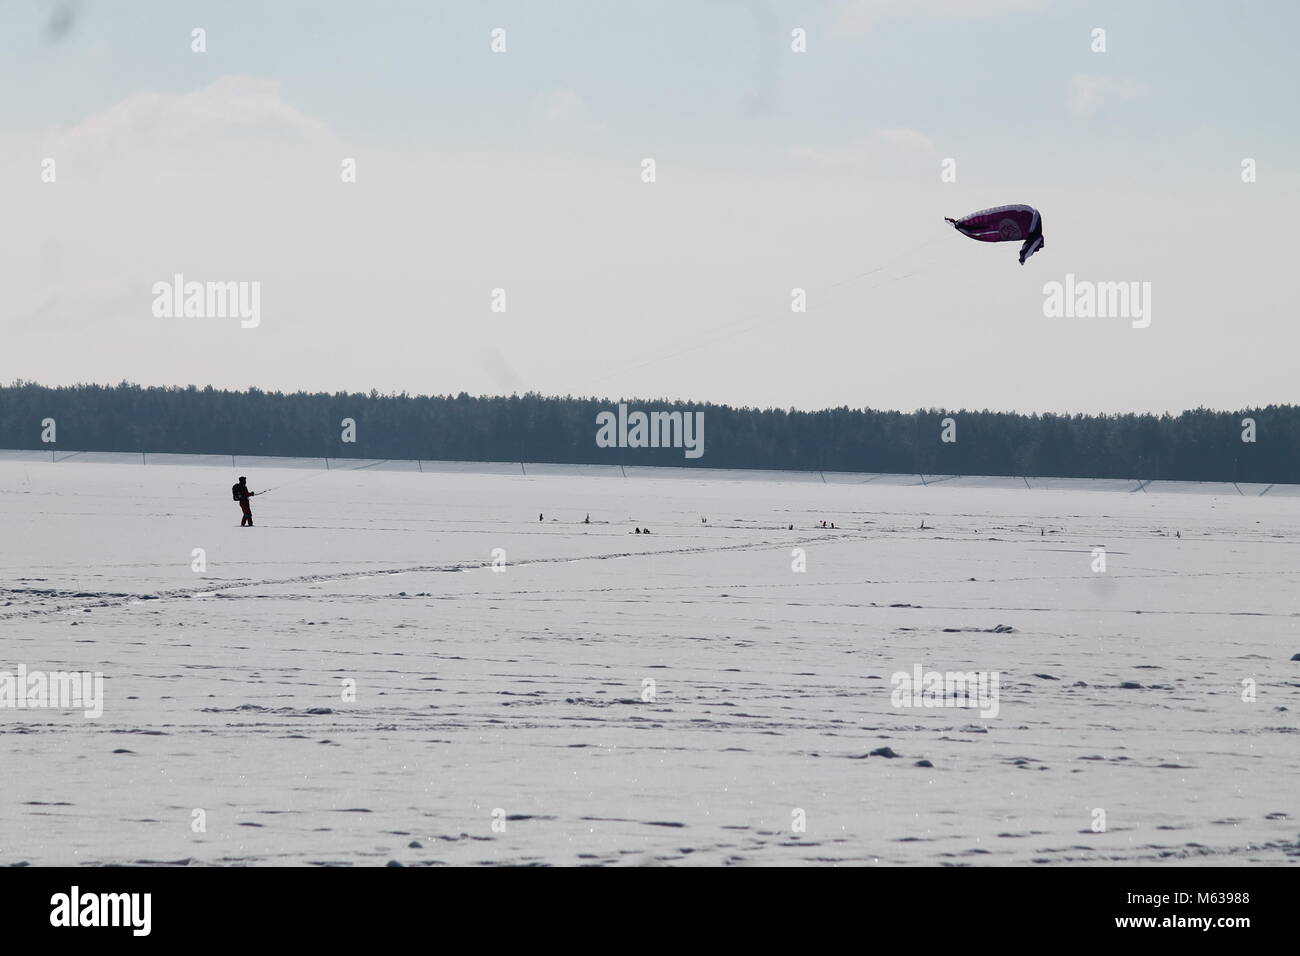 brave man under parachute on snowboard training on the surface of frozen sea in cold winter day Stock Photo